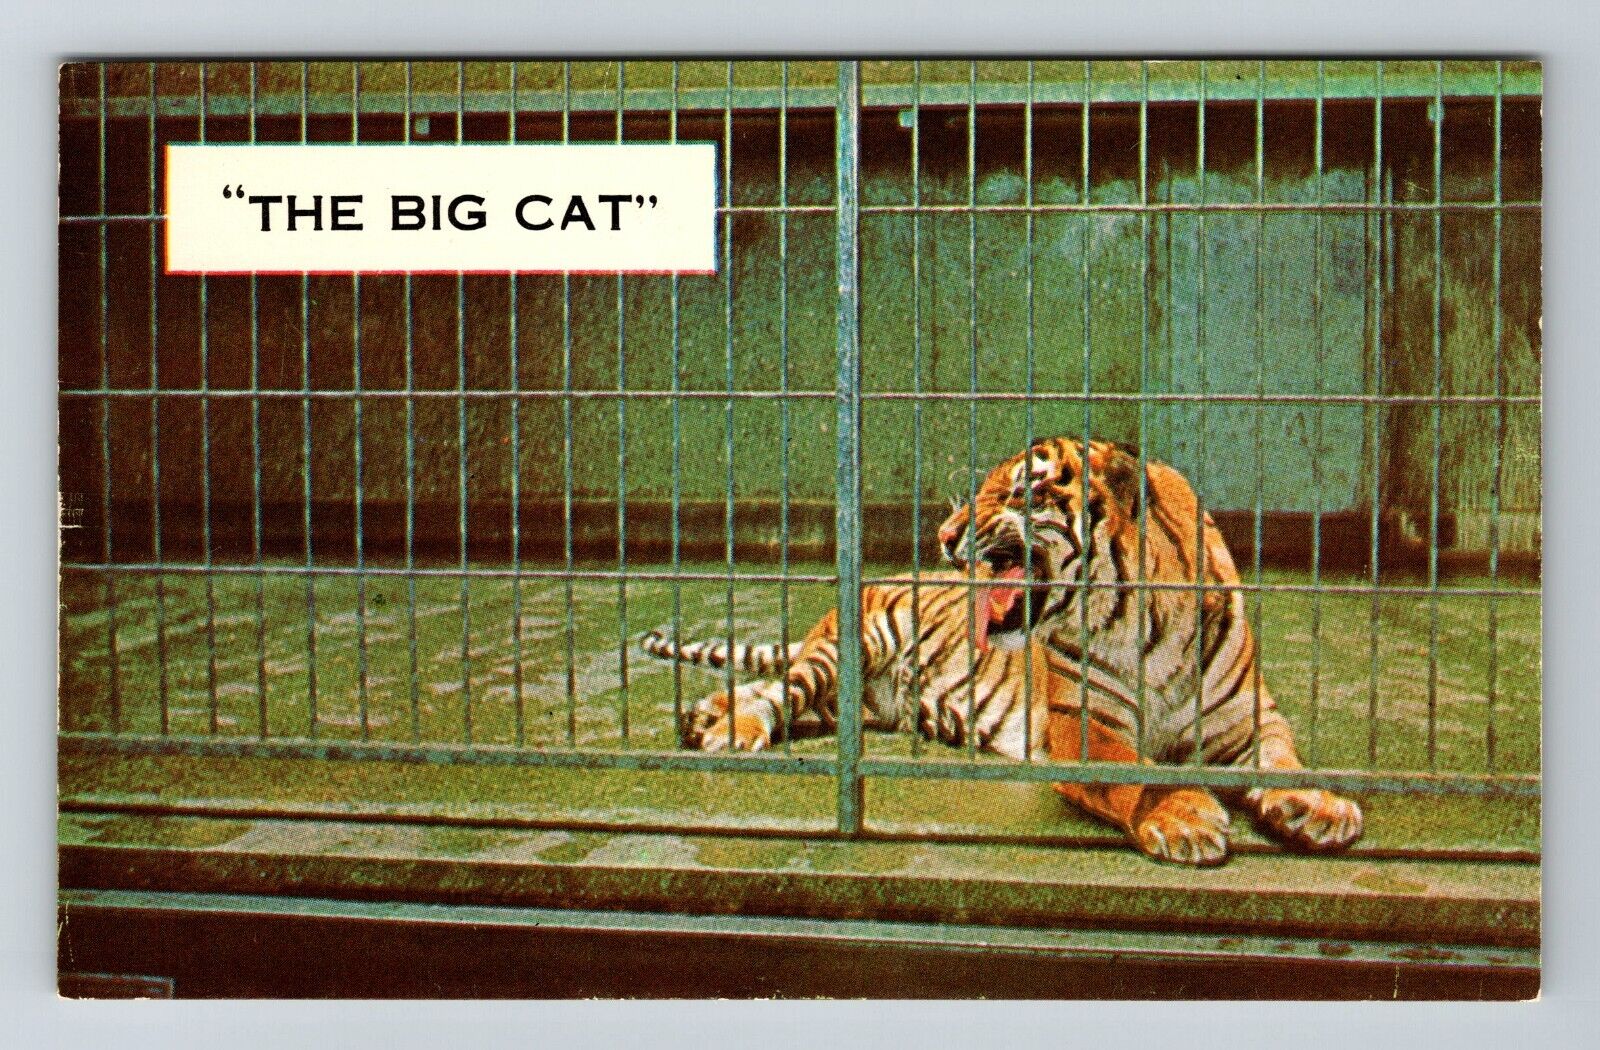 Brookfield IL-Illinois, Tiger In A Cage Area, The Big Cat, Vintage Postcard